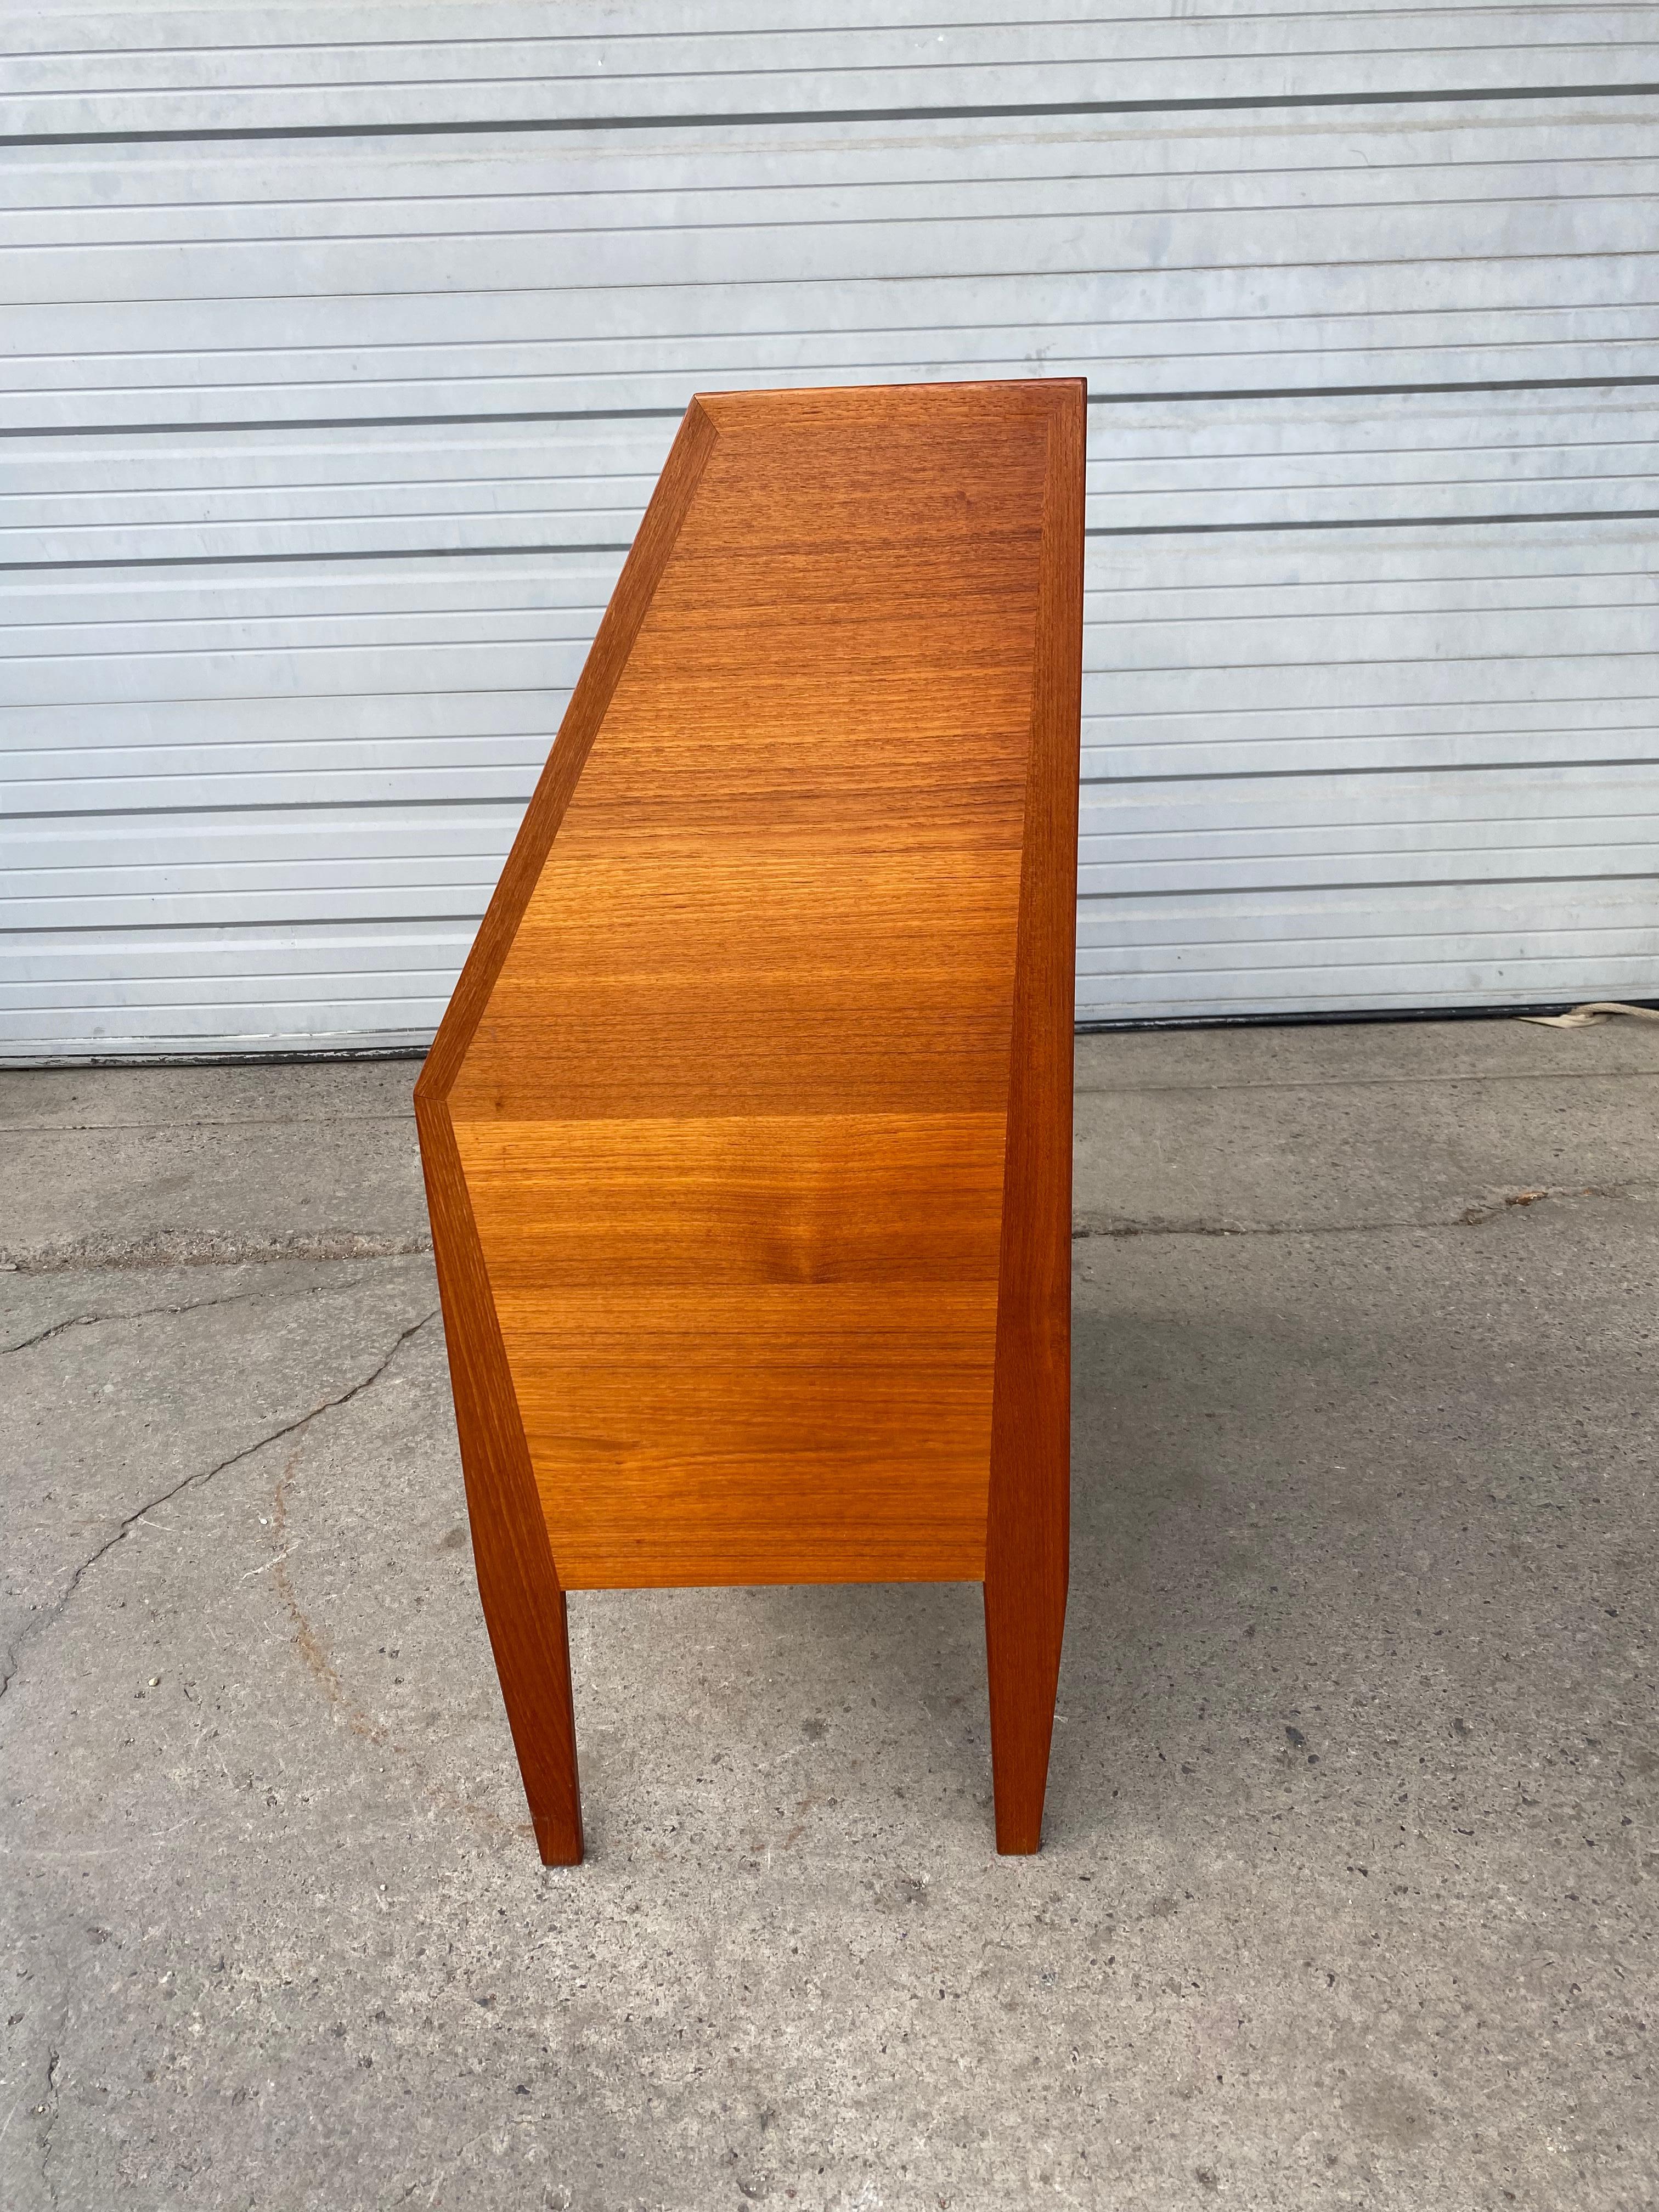 Beautiful secretary desk attributed to Gunnar Nielsen Tibergaard and produced by Tibergaard Denmark in the 1960s in Denmark. The lid of the desk is also the desktop when it is folded open. storage compartments and drawers can be found behind this